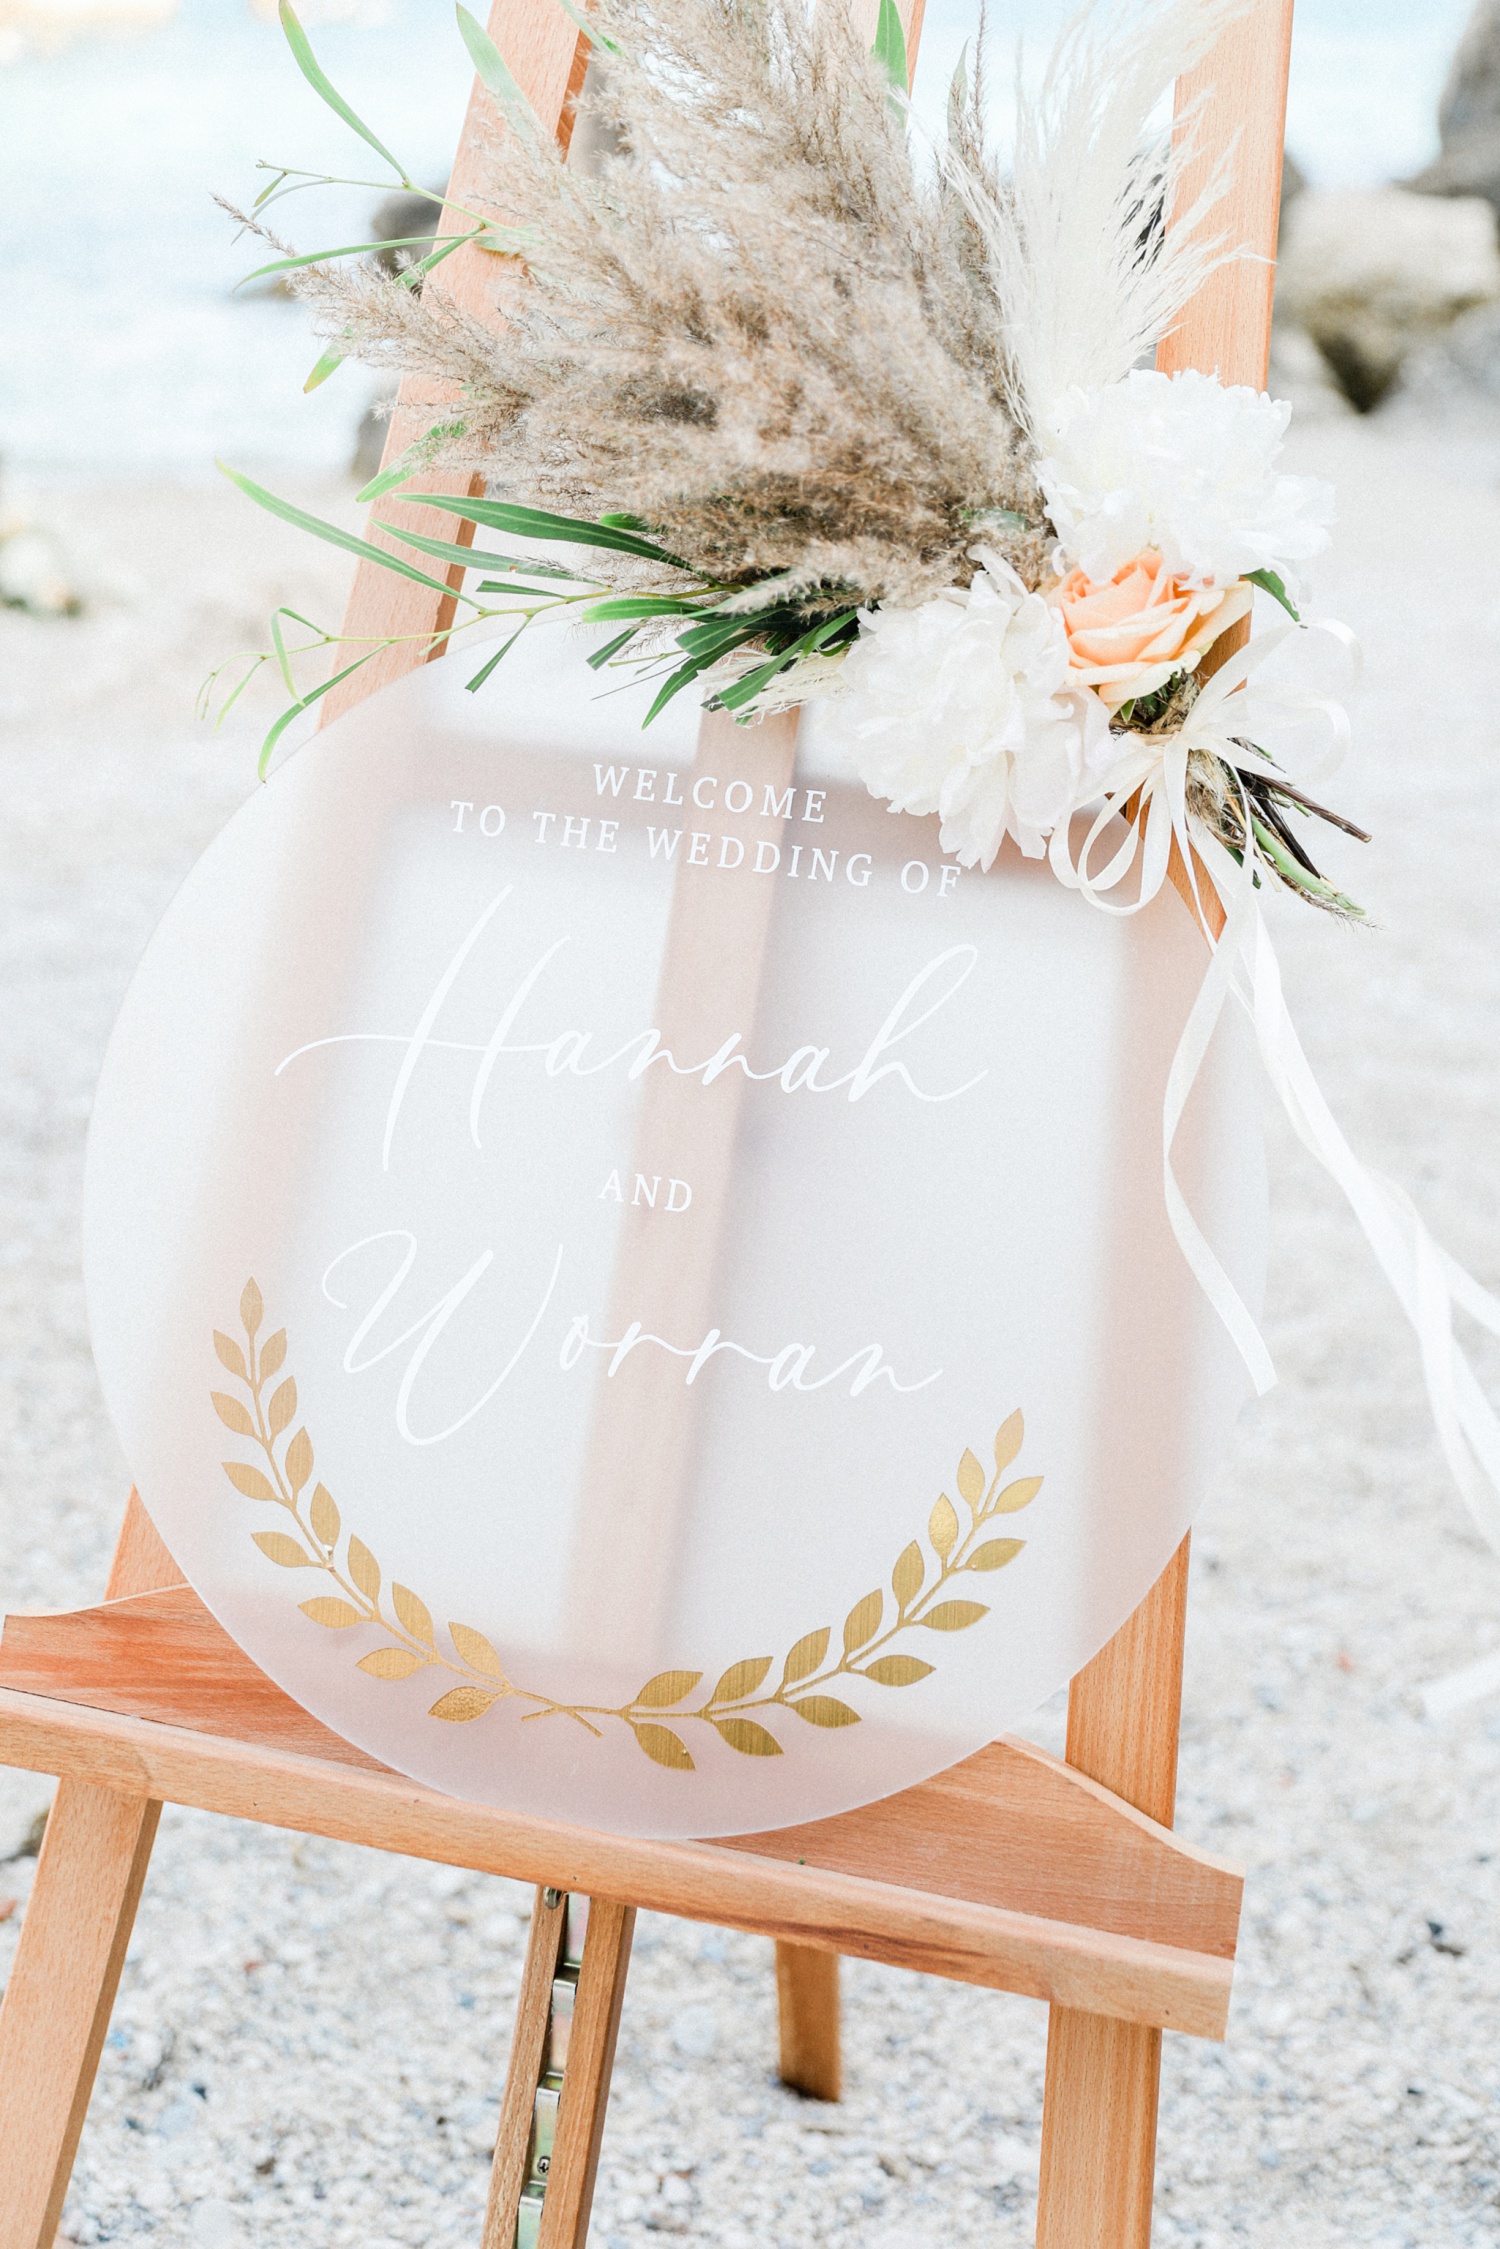 Perspex welcome sign with pampas decor at a beach wedding in Parga